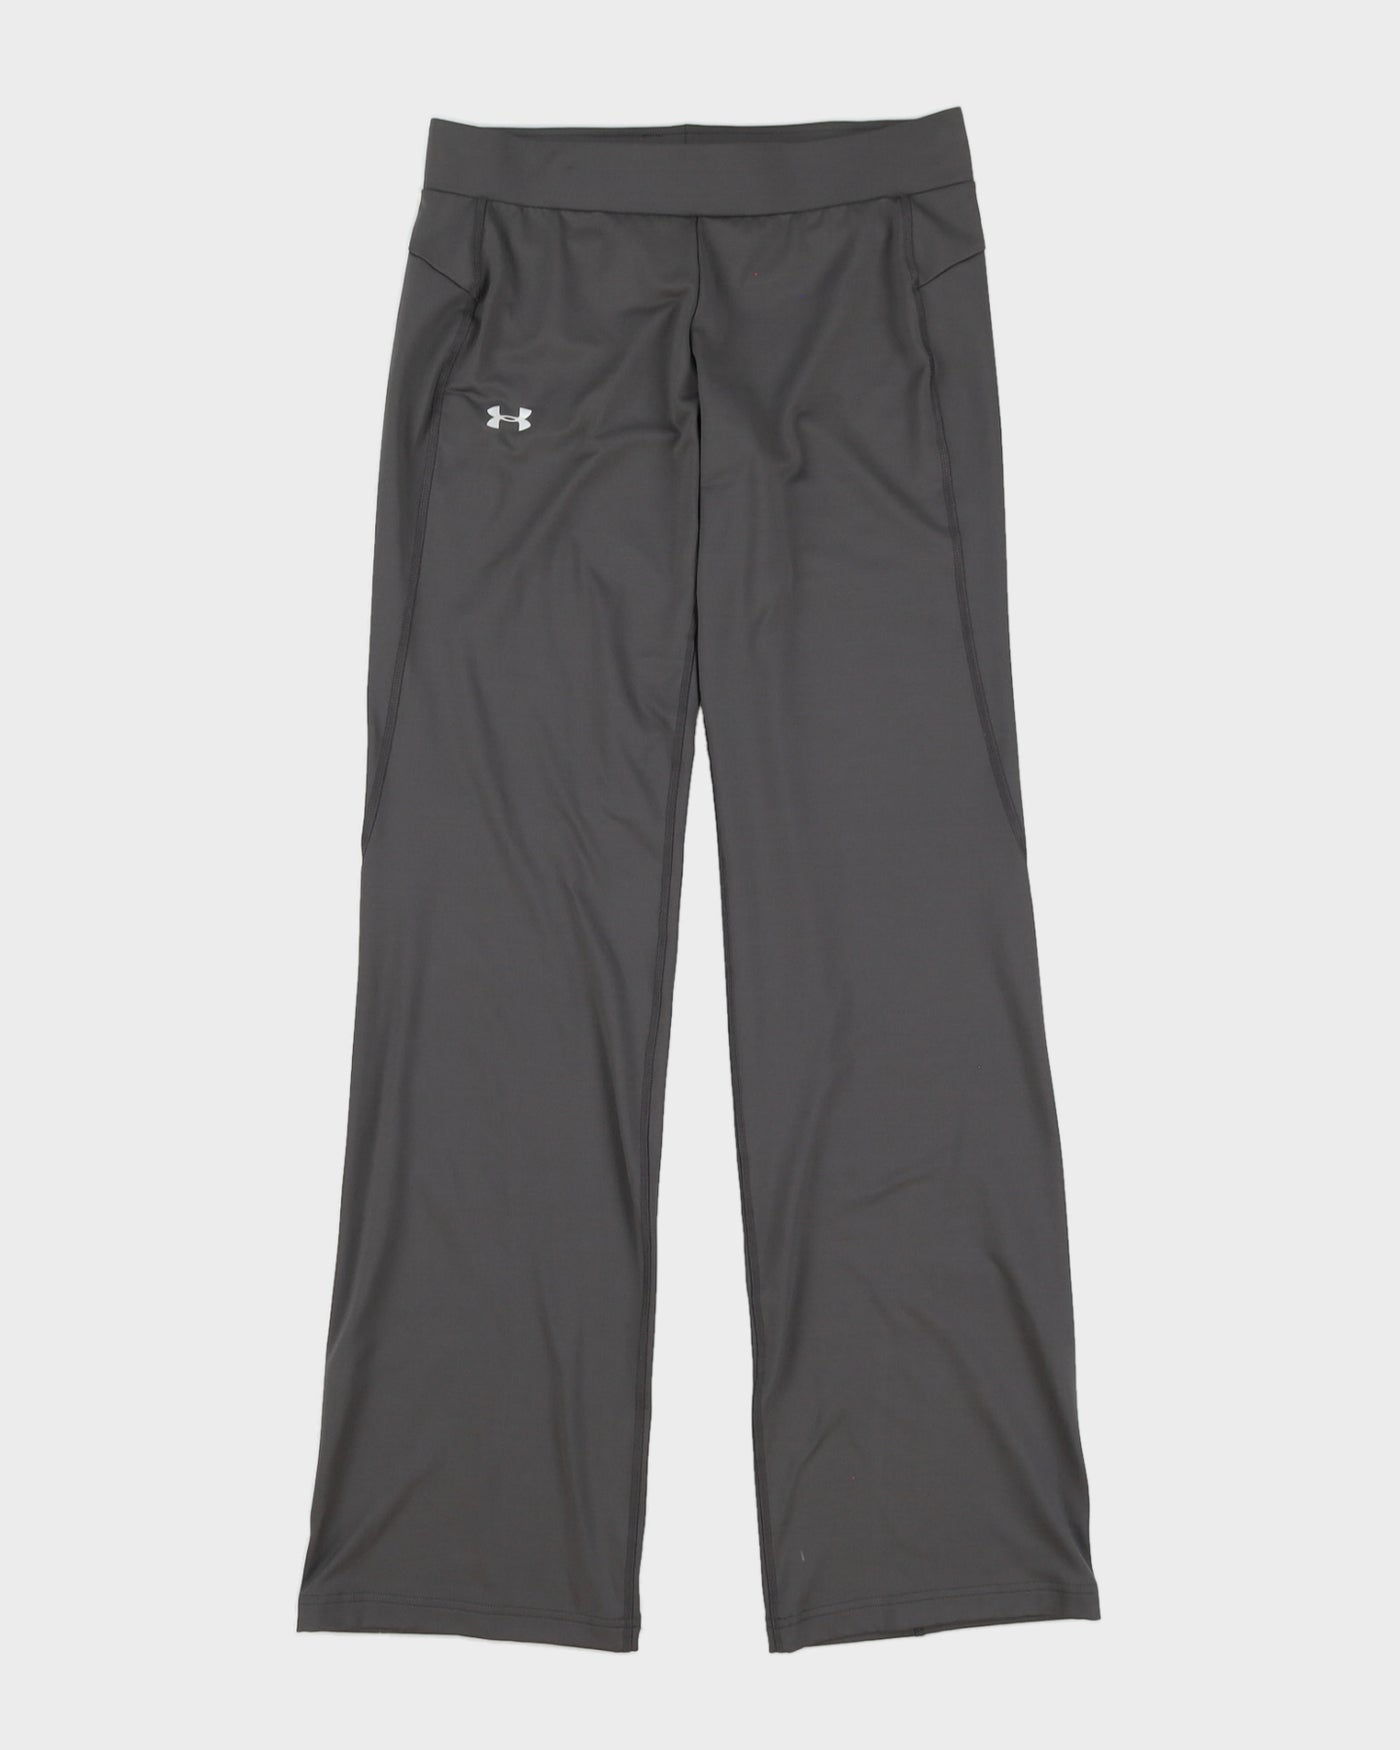 Under Armour Grey Sports Trousers - M – Rokit